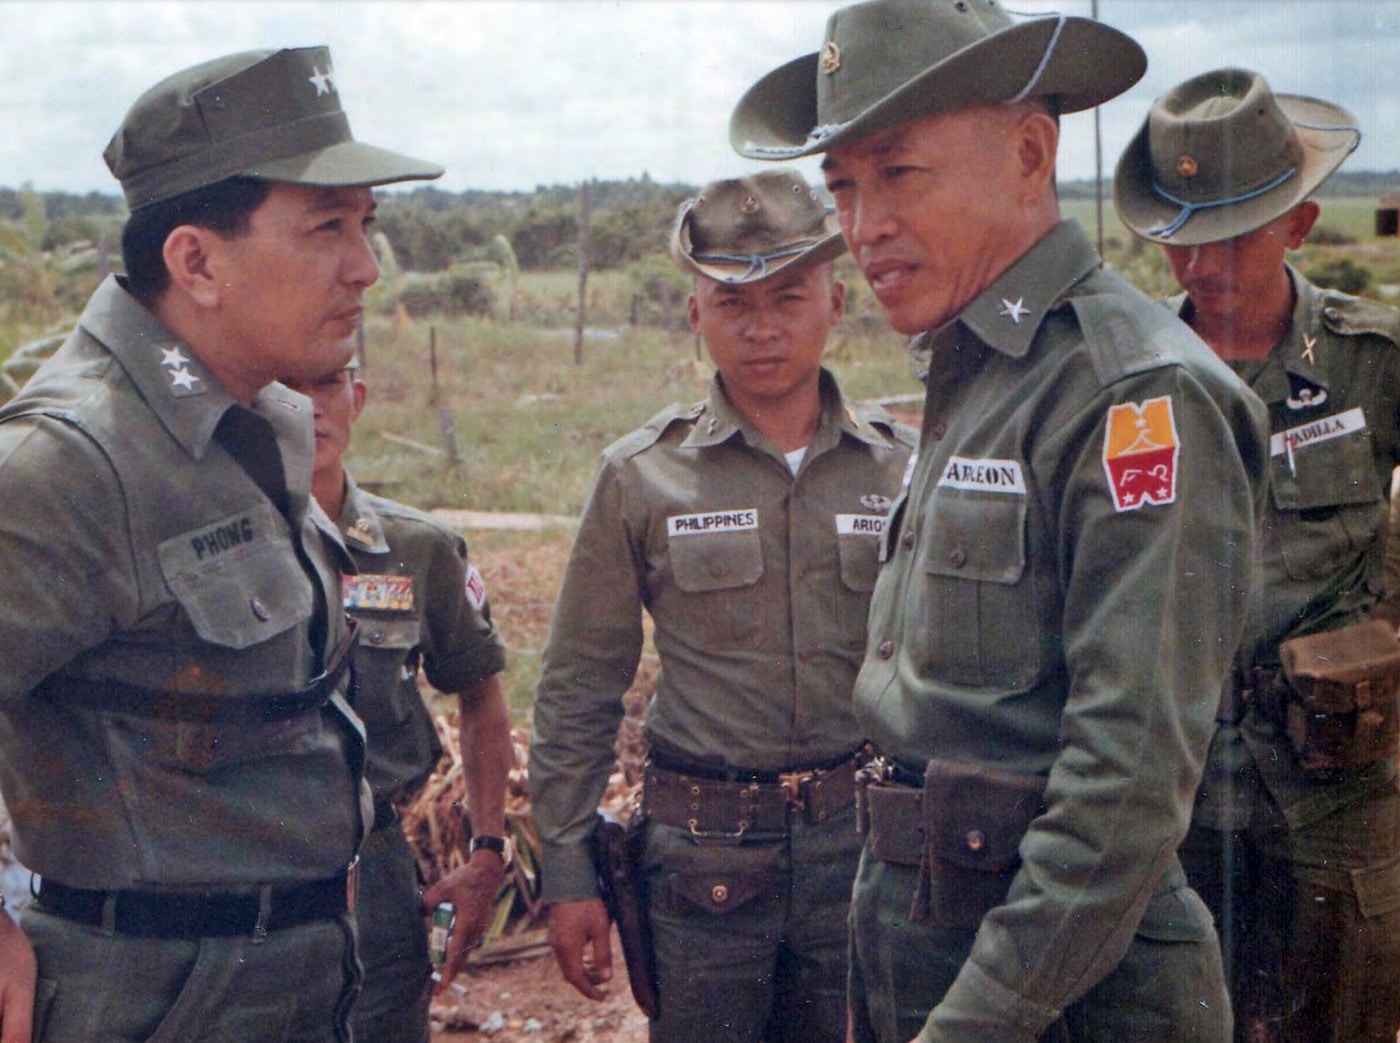 ARVN Major General Trần Thanh Phong meets with a Philippine Army Brigadier General near Ben Dinh in September 1968. Philippine troops were involved in a humanitarian mission there. Image: NARA